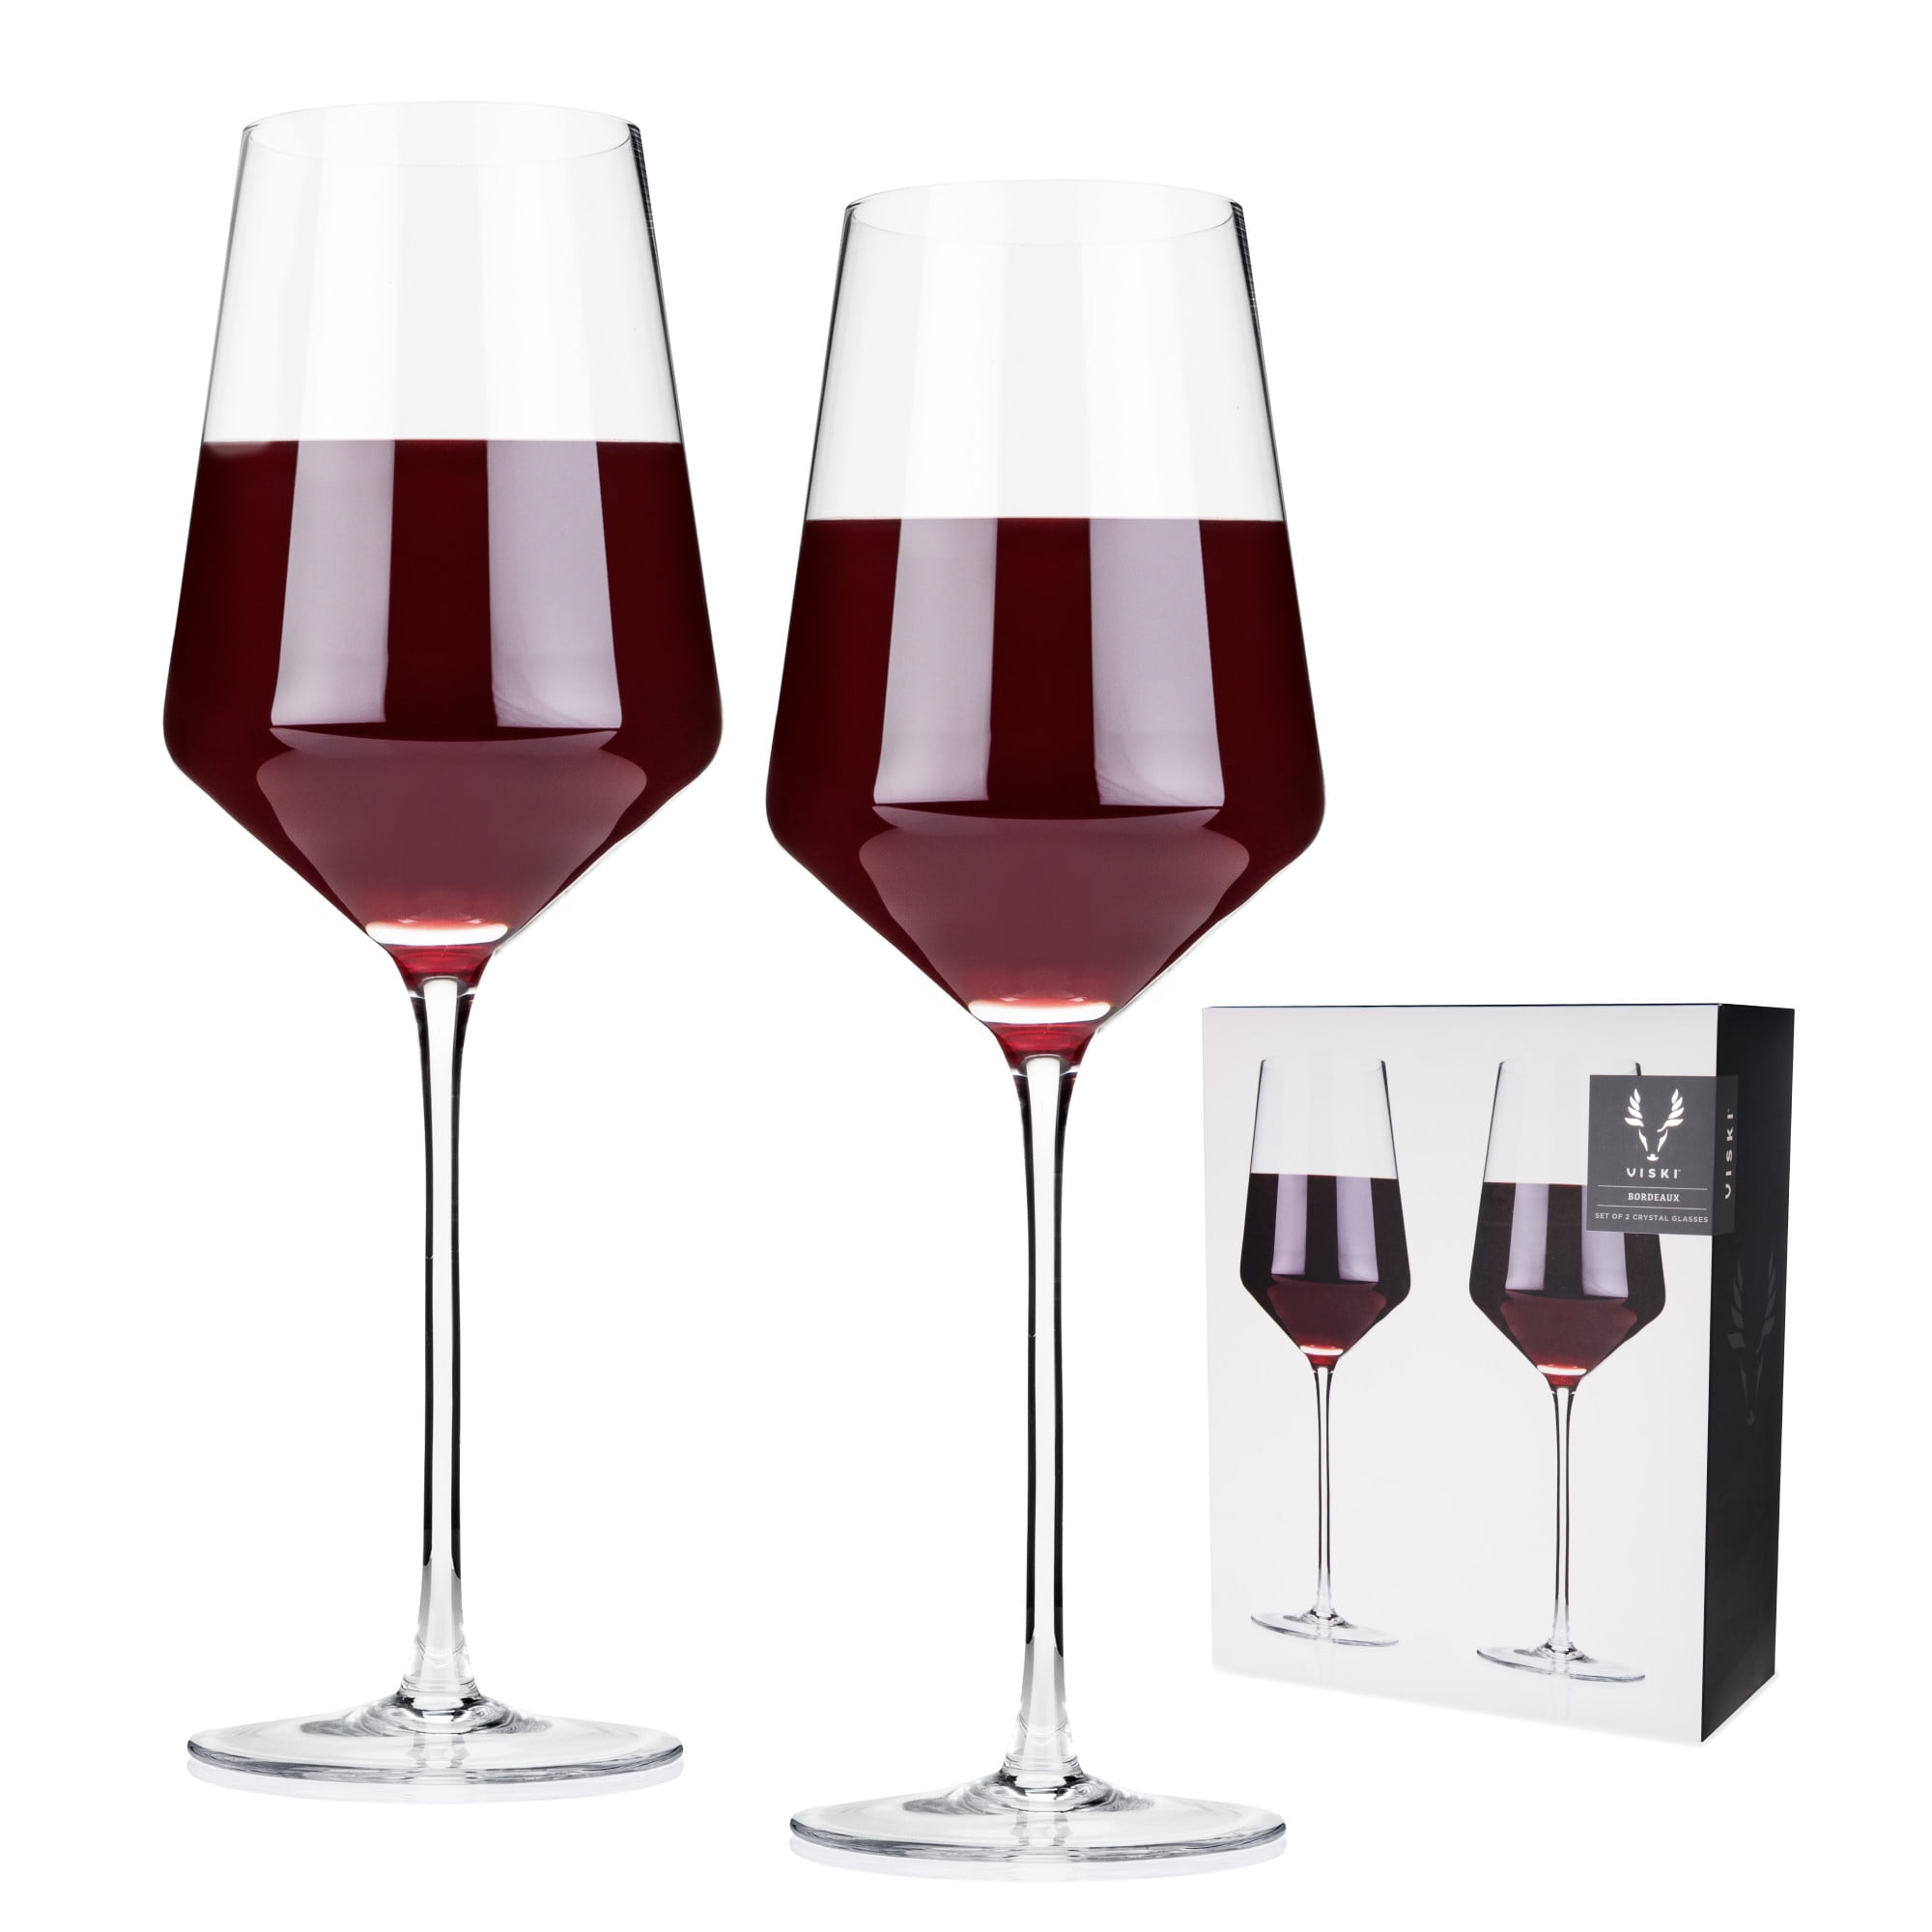 Angled Crystal Coupe Glasses (set of 4) by Viski®, Pack of 1 - Fry's Food  Stores